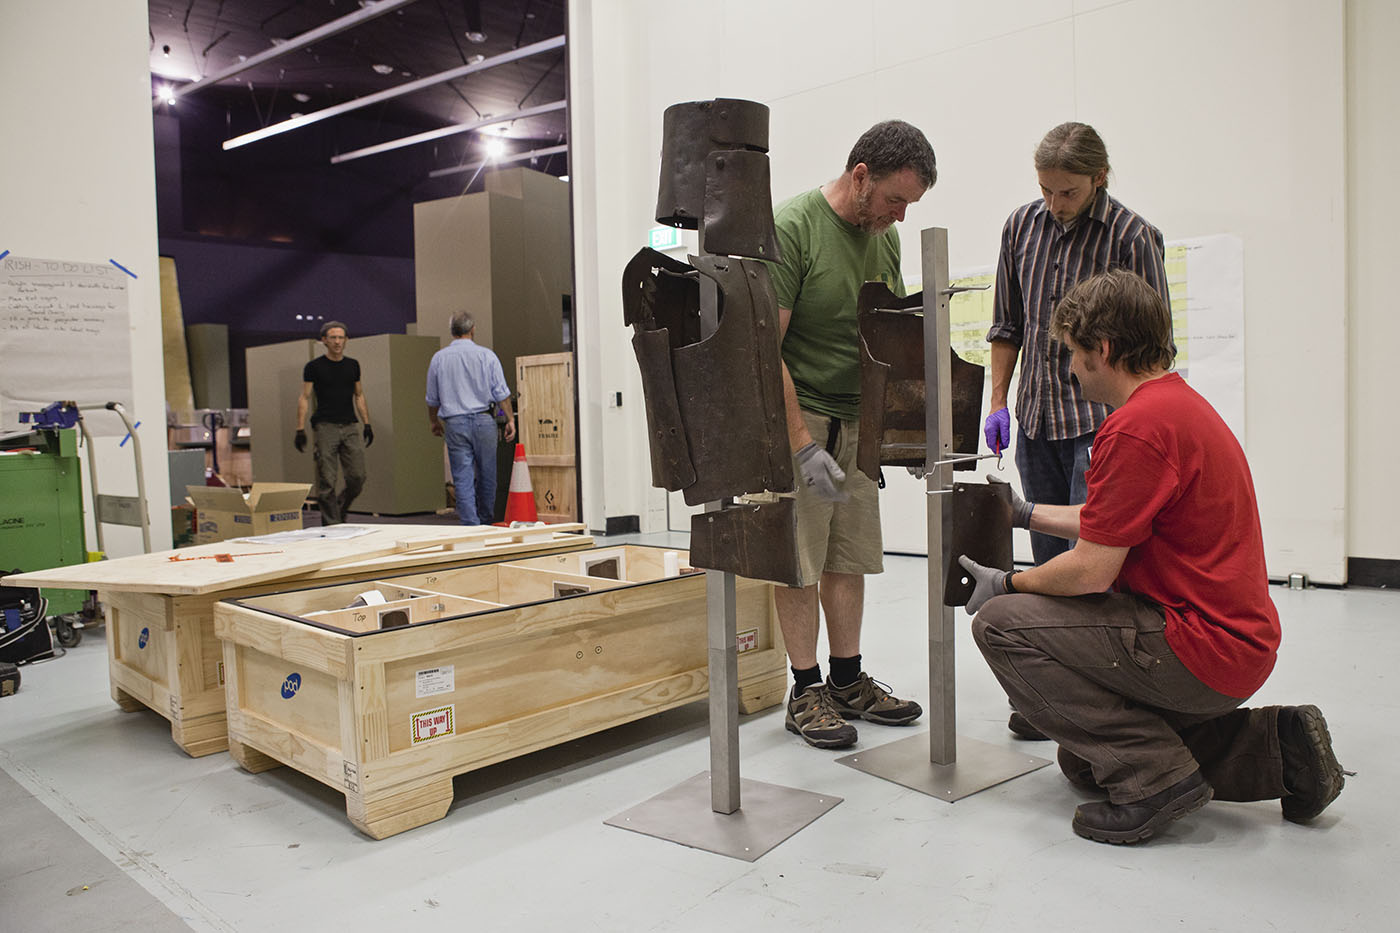 Staff working on installing armoury for an exhibition. - click to view larger image